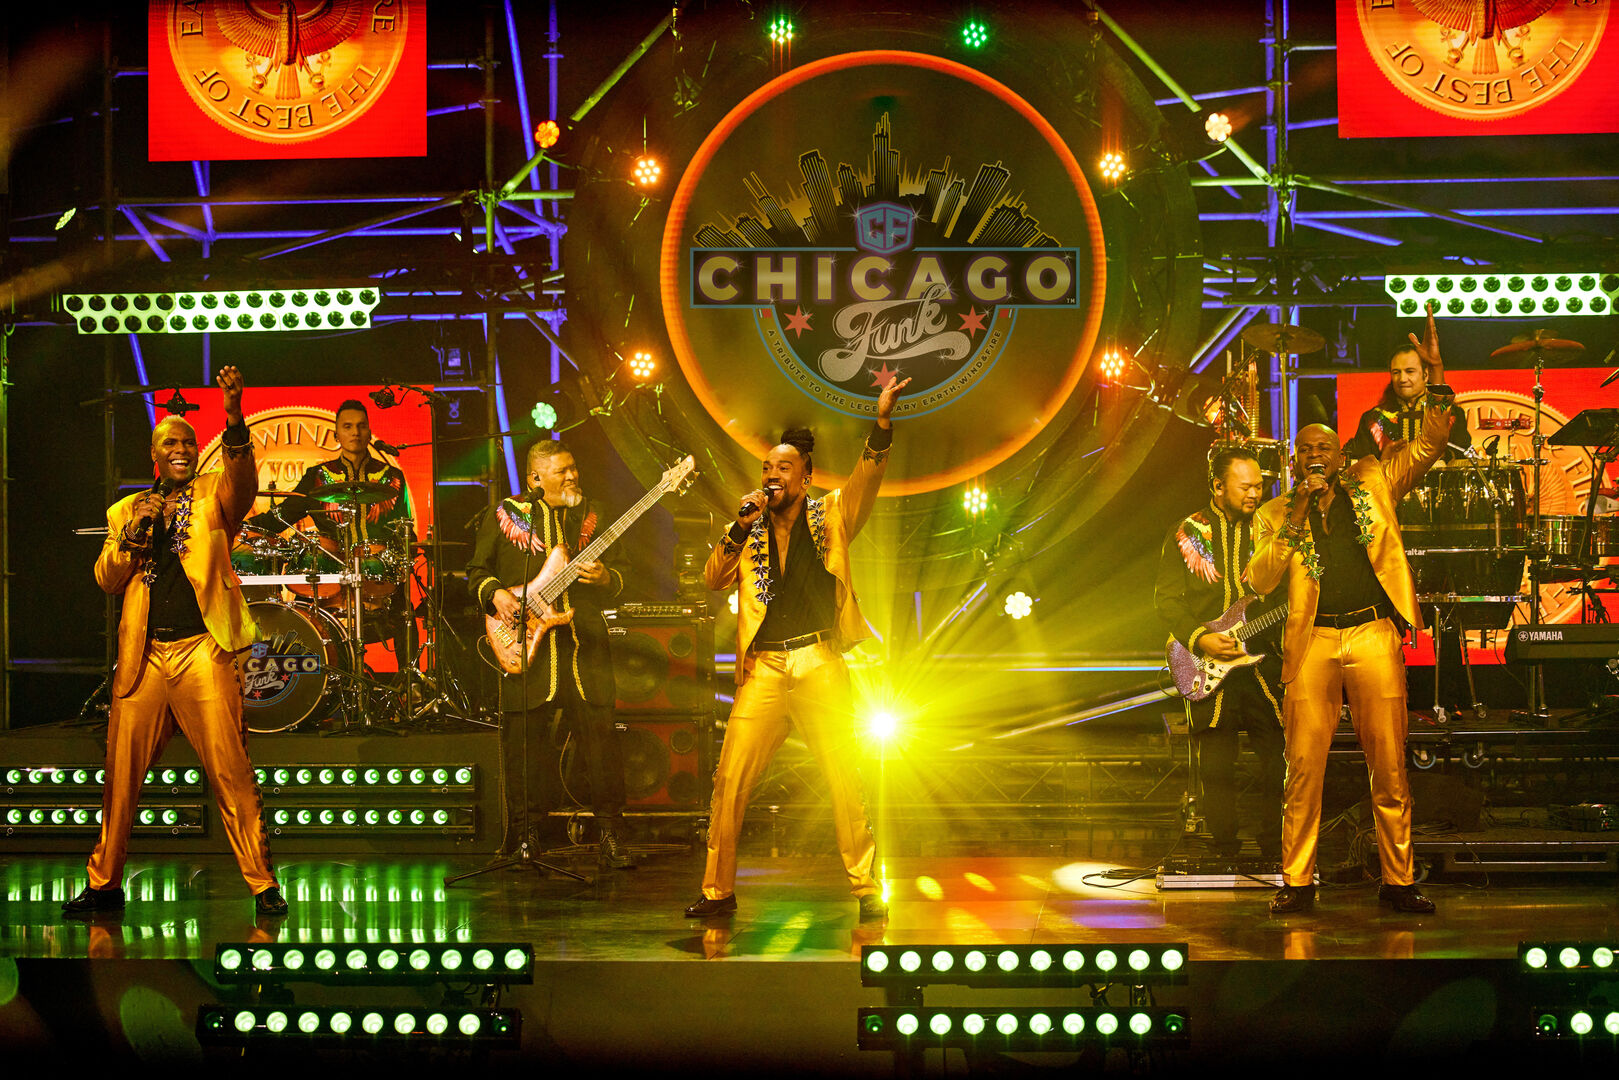 The Chicago Funk - The Funk is Back in Town!